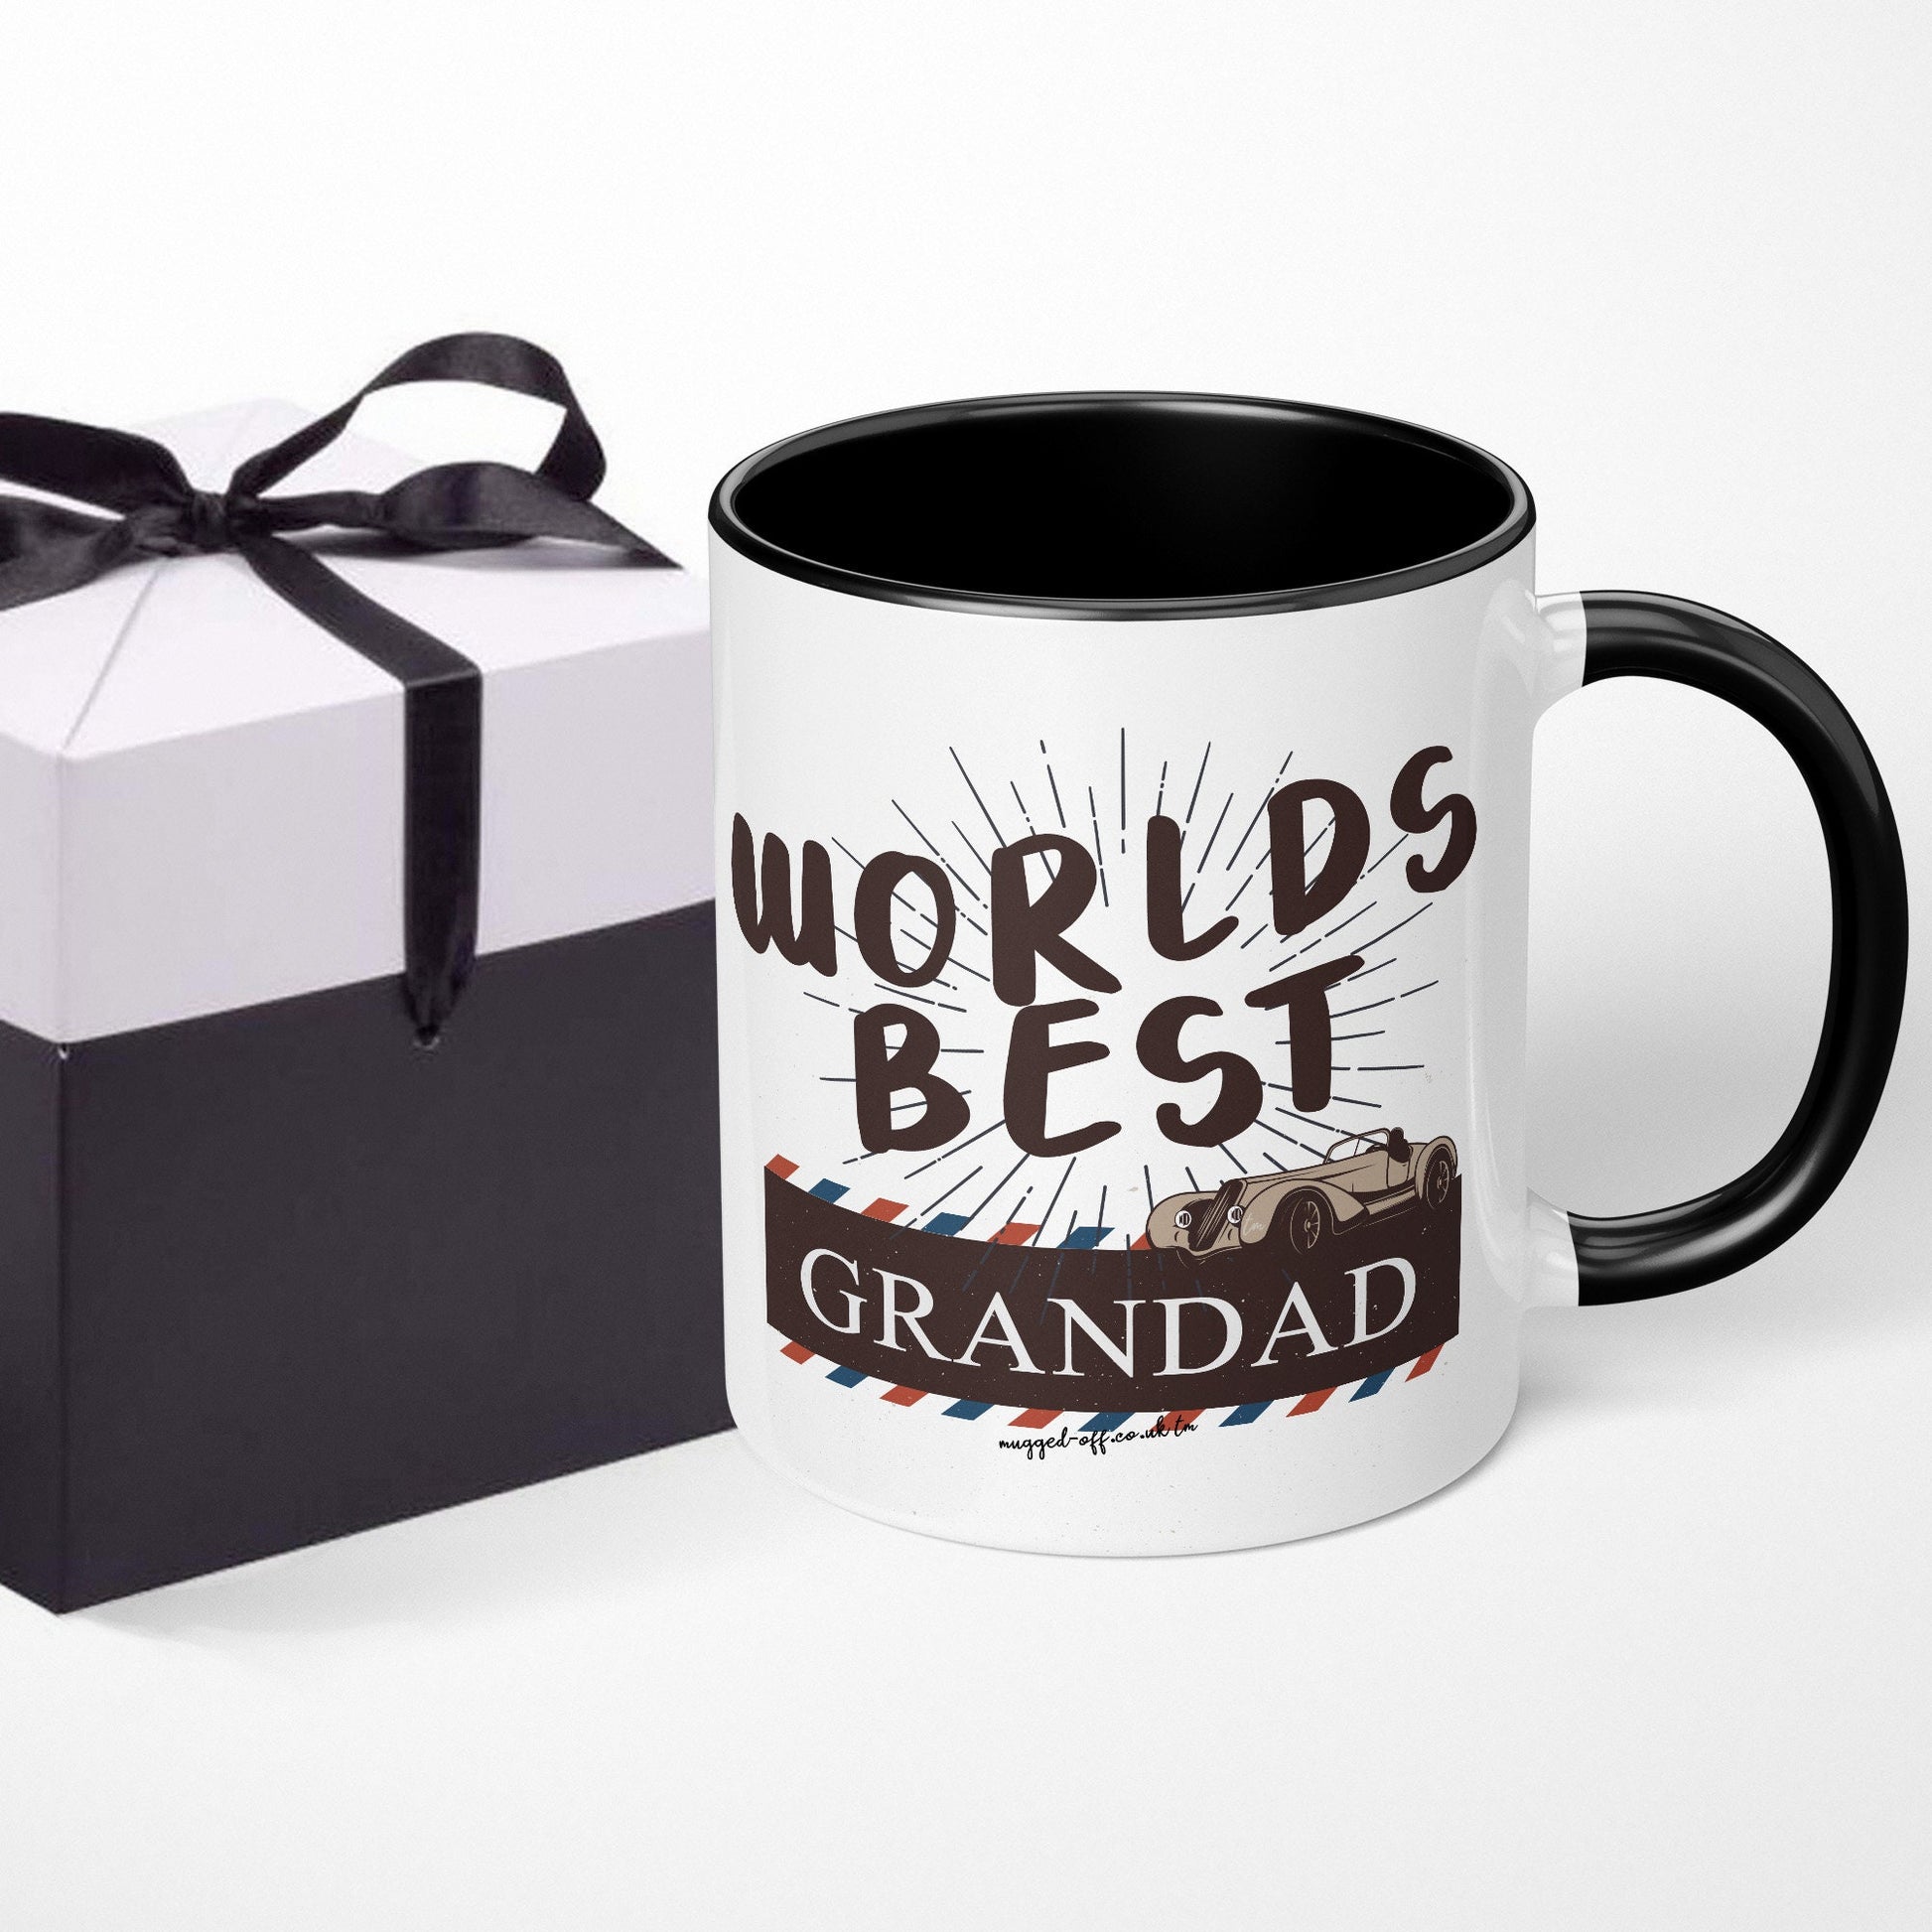 How to Pick the Perfect Personalised Gifts for Friends